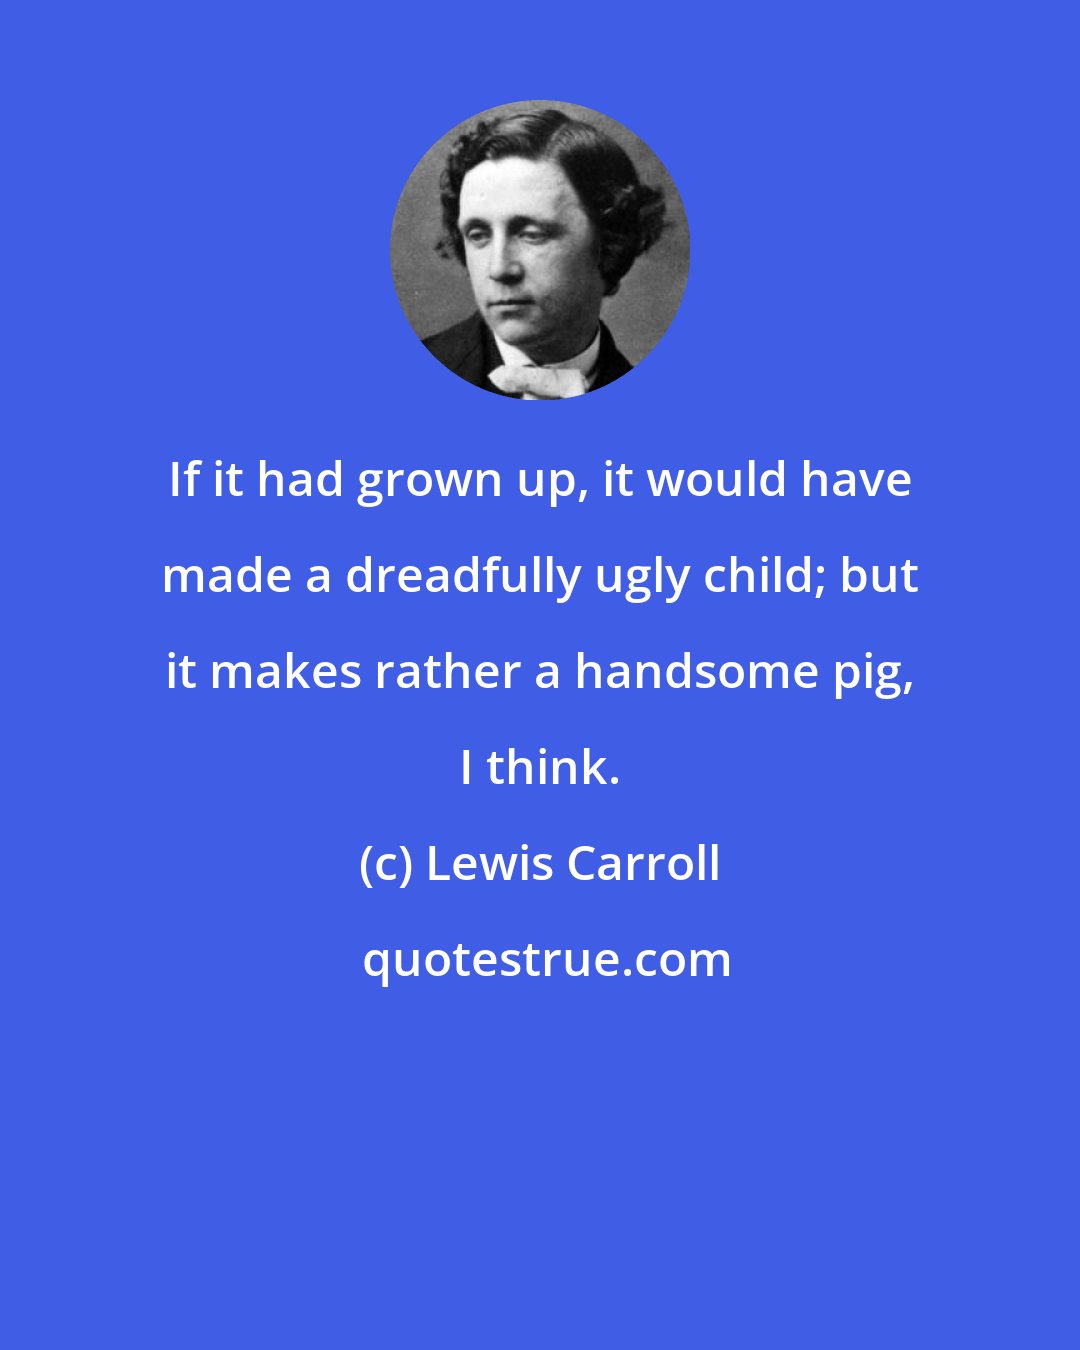 Lewis Carroll: If it had grown up, it would have made a dreadfully ugly child; but it makes rather a handsome pig, I think.